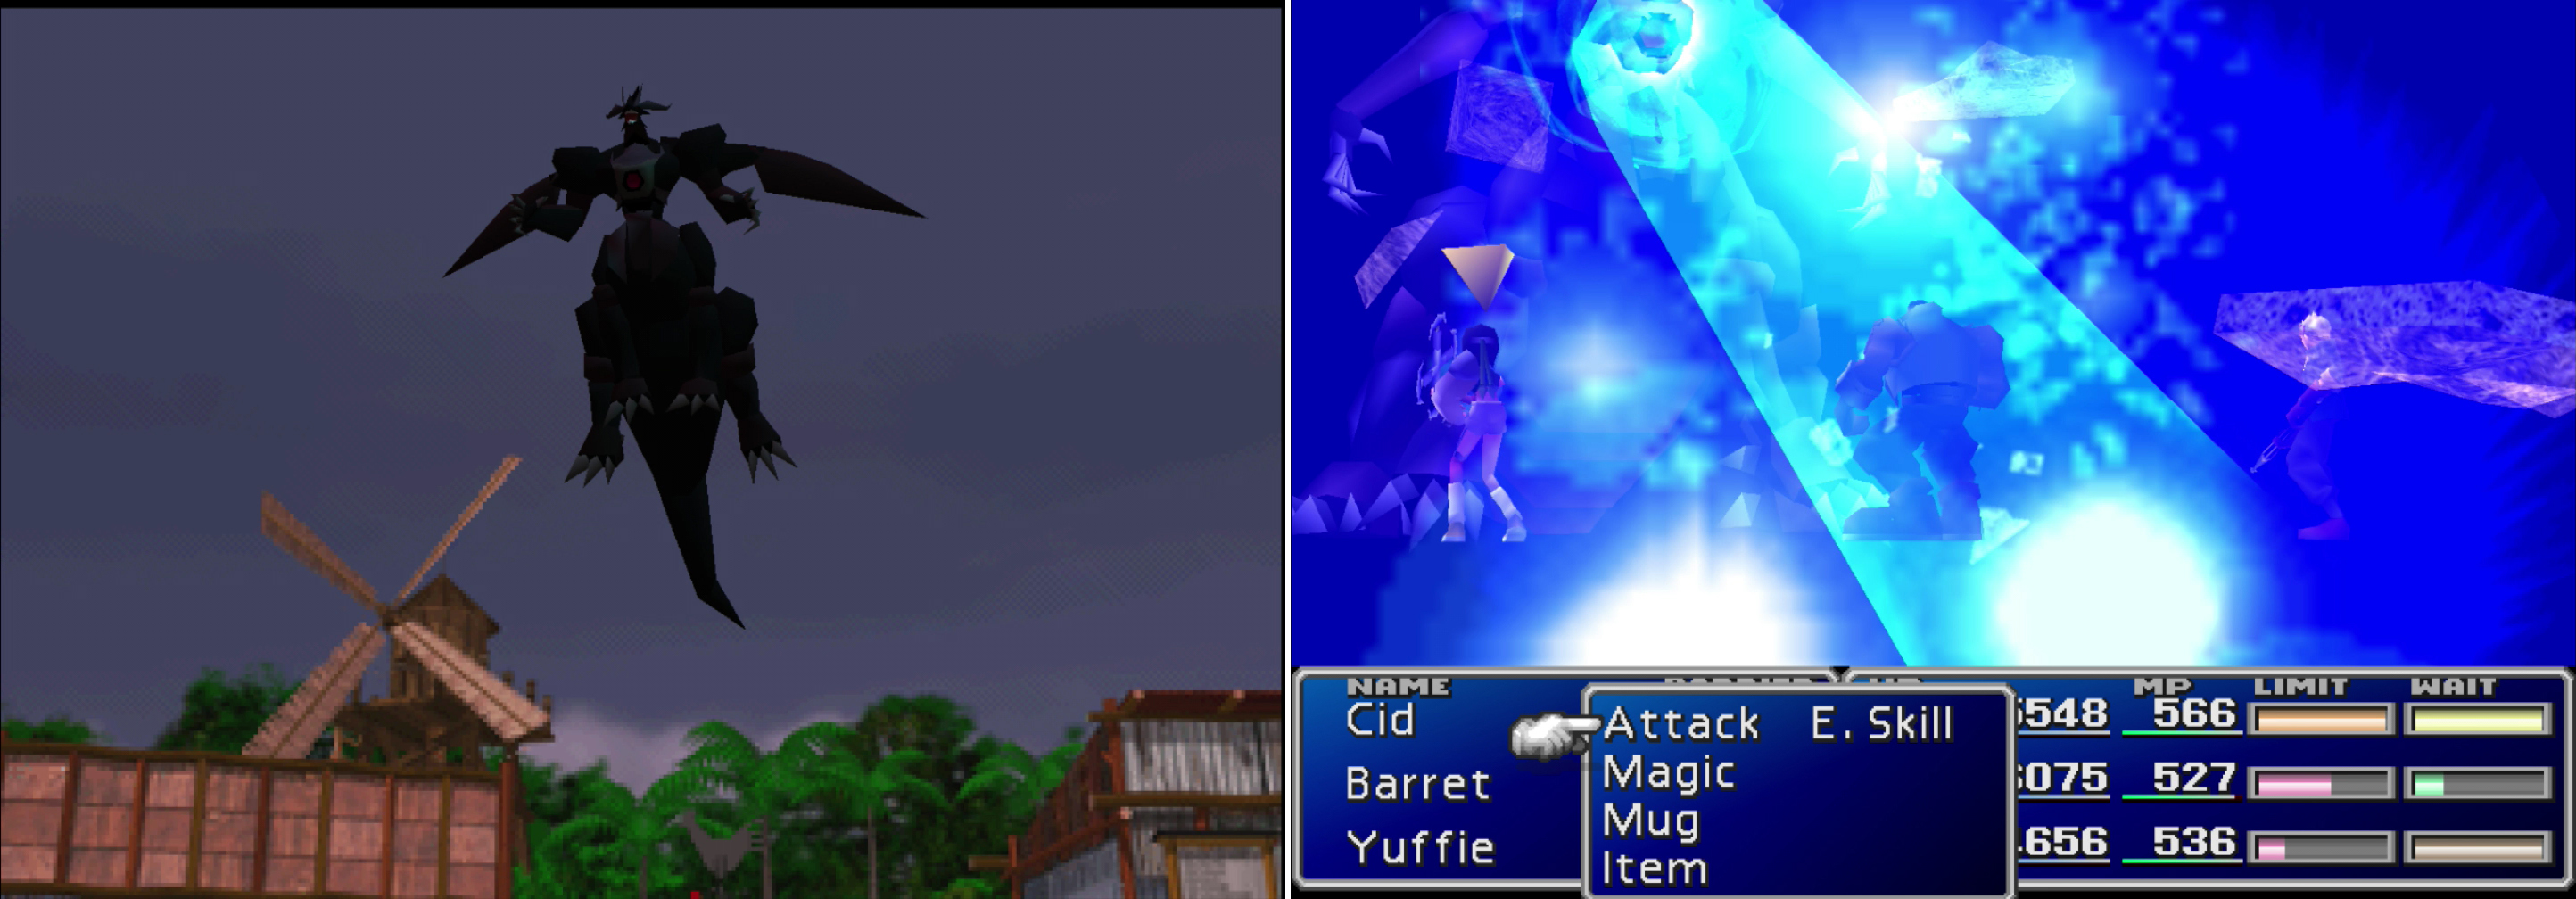 As the Lifestream threatens to erupt, Ultimate Weapon shows up to complicate matters (left). His "Ultima Beam" is fairly powerful, but Ultimate Weapon's heart isn't in this fight (right).